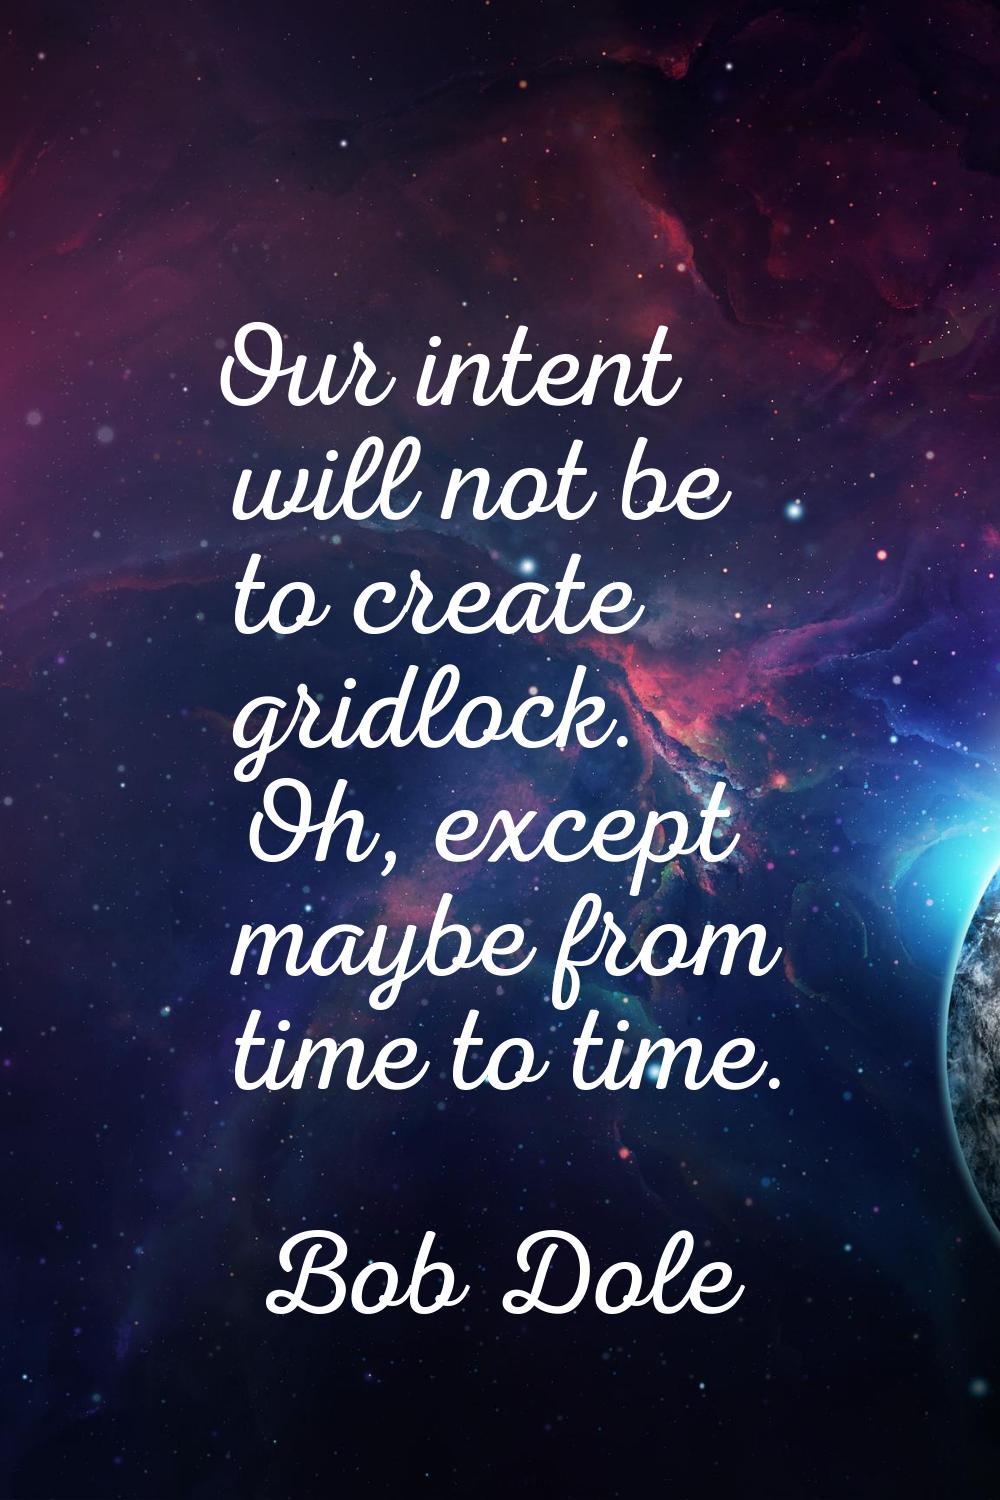 Our intent will not be to create gridlock. Oh, except maybe from time to time.